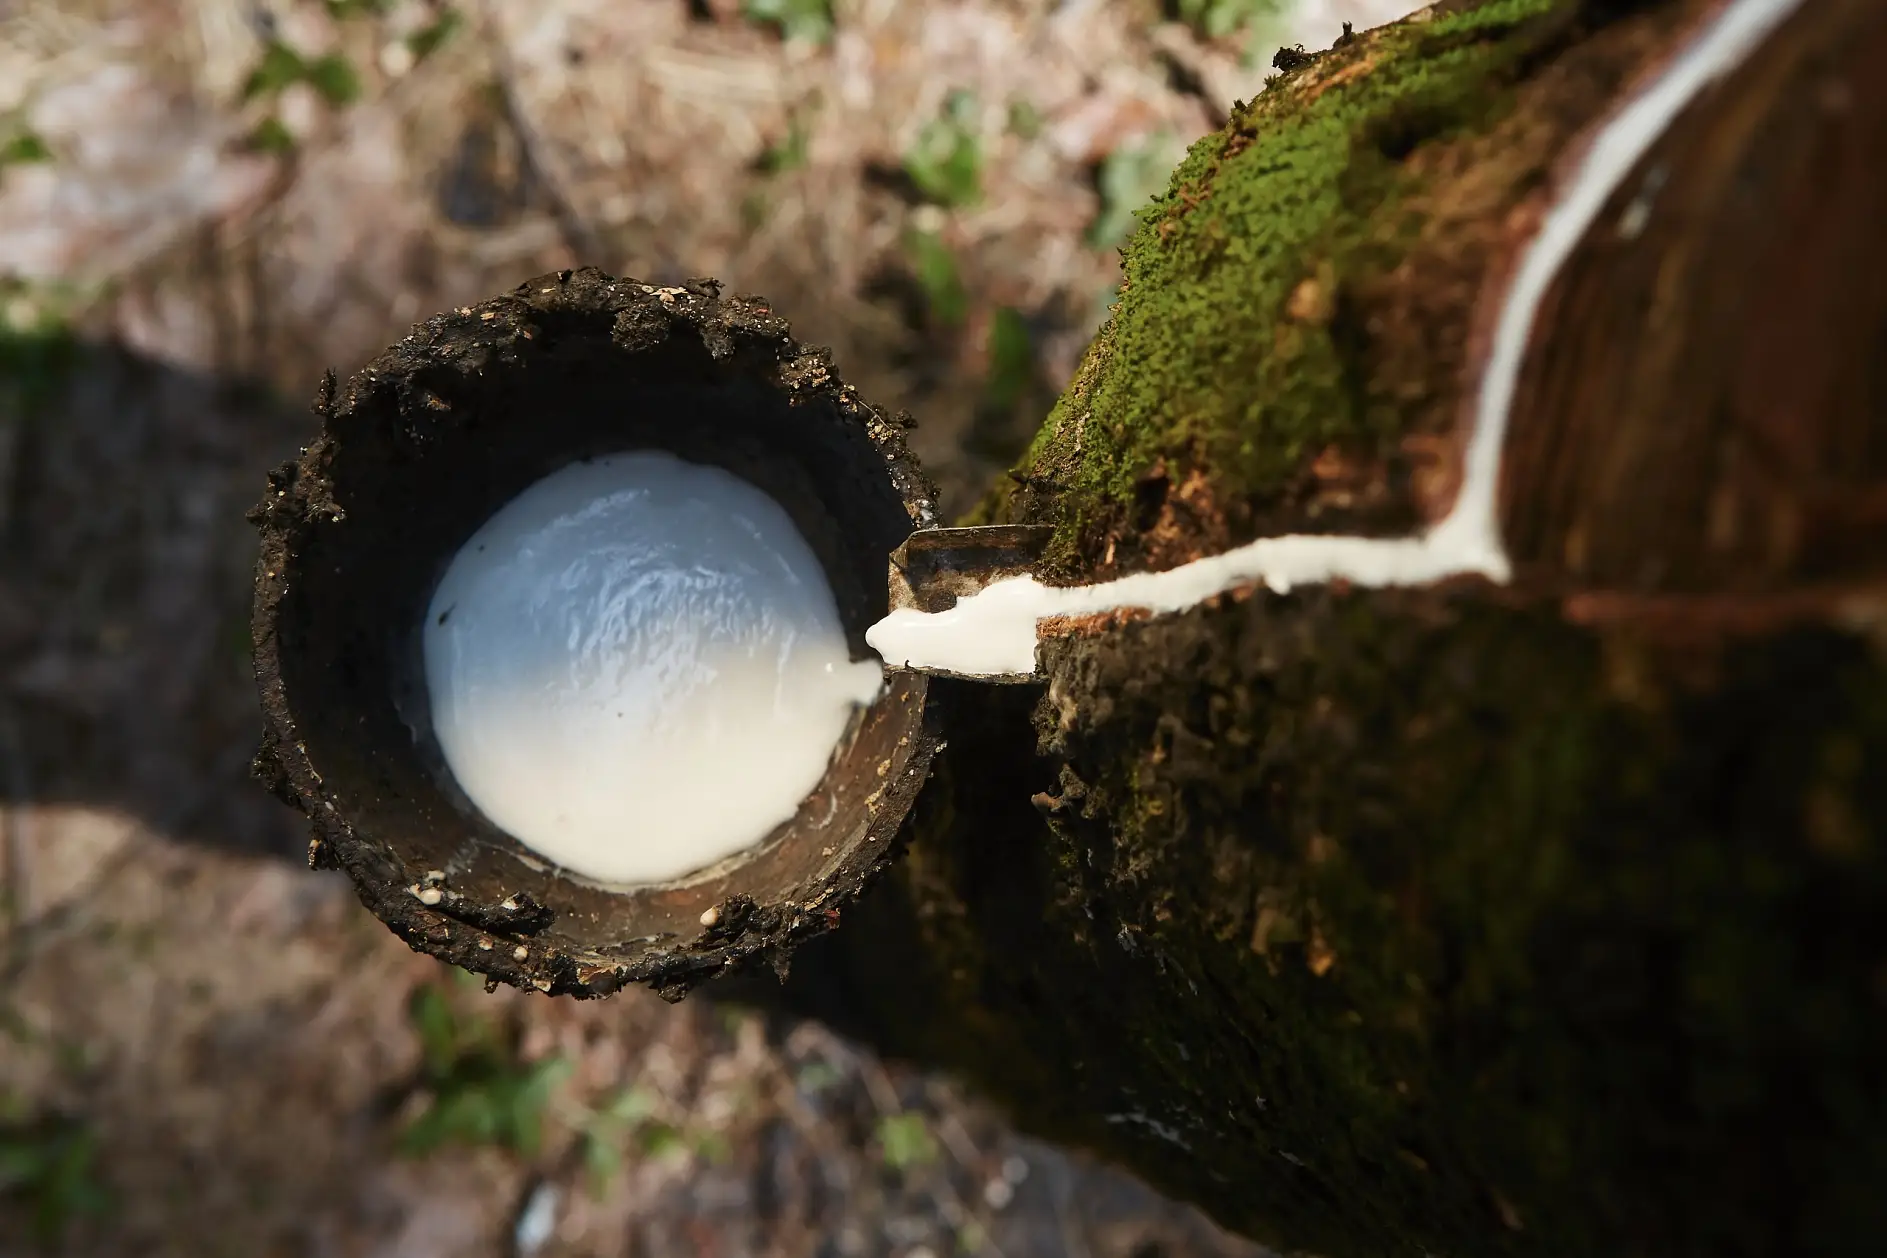 Collecting natural latex from rubber tree.